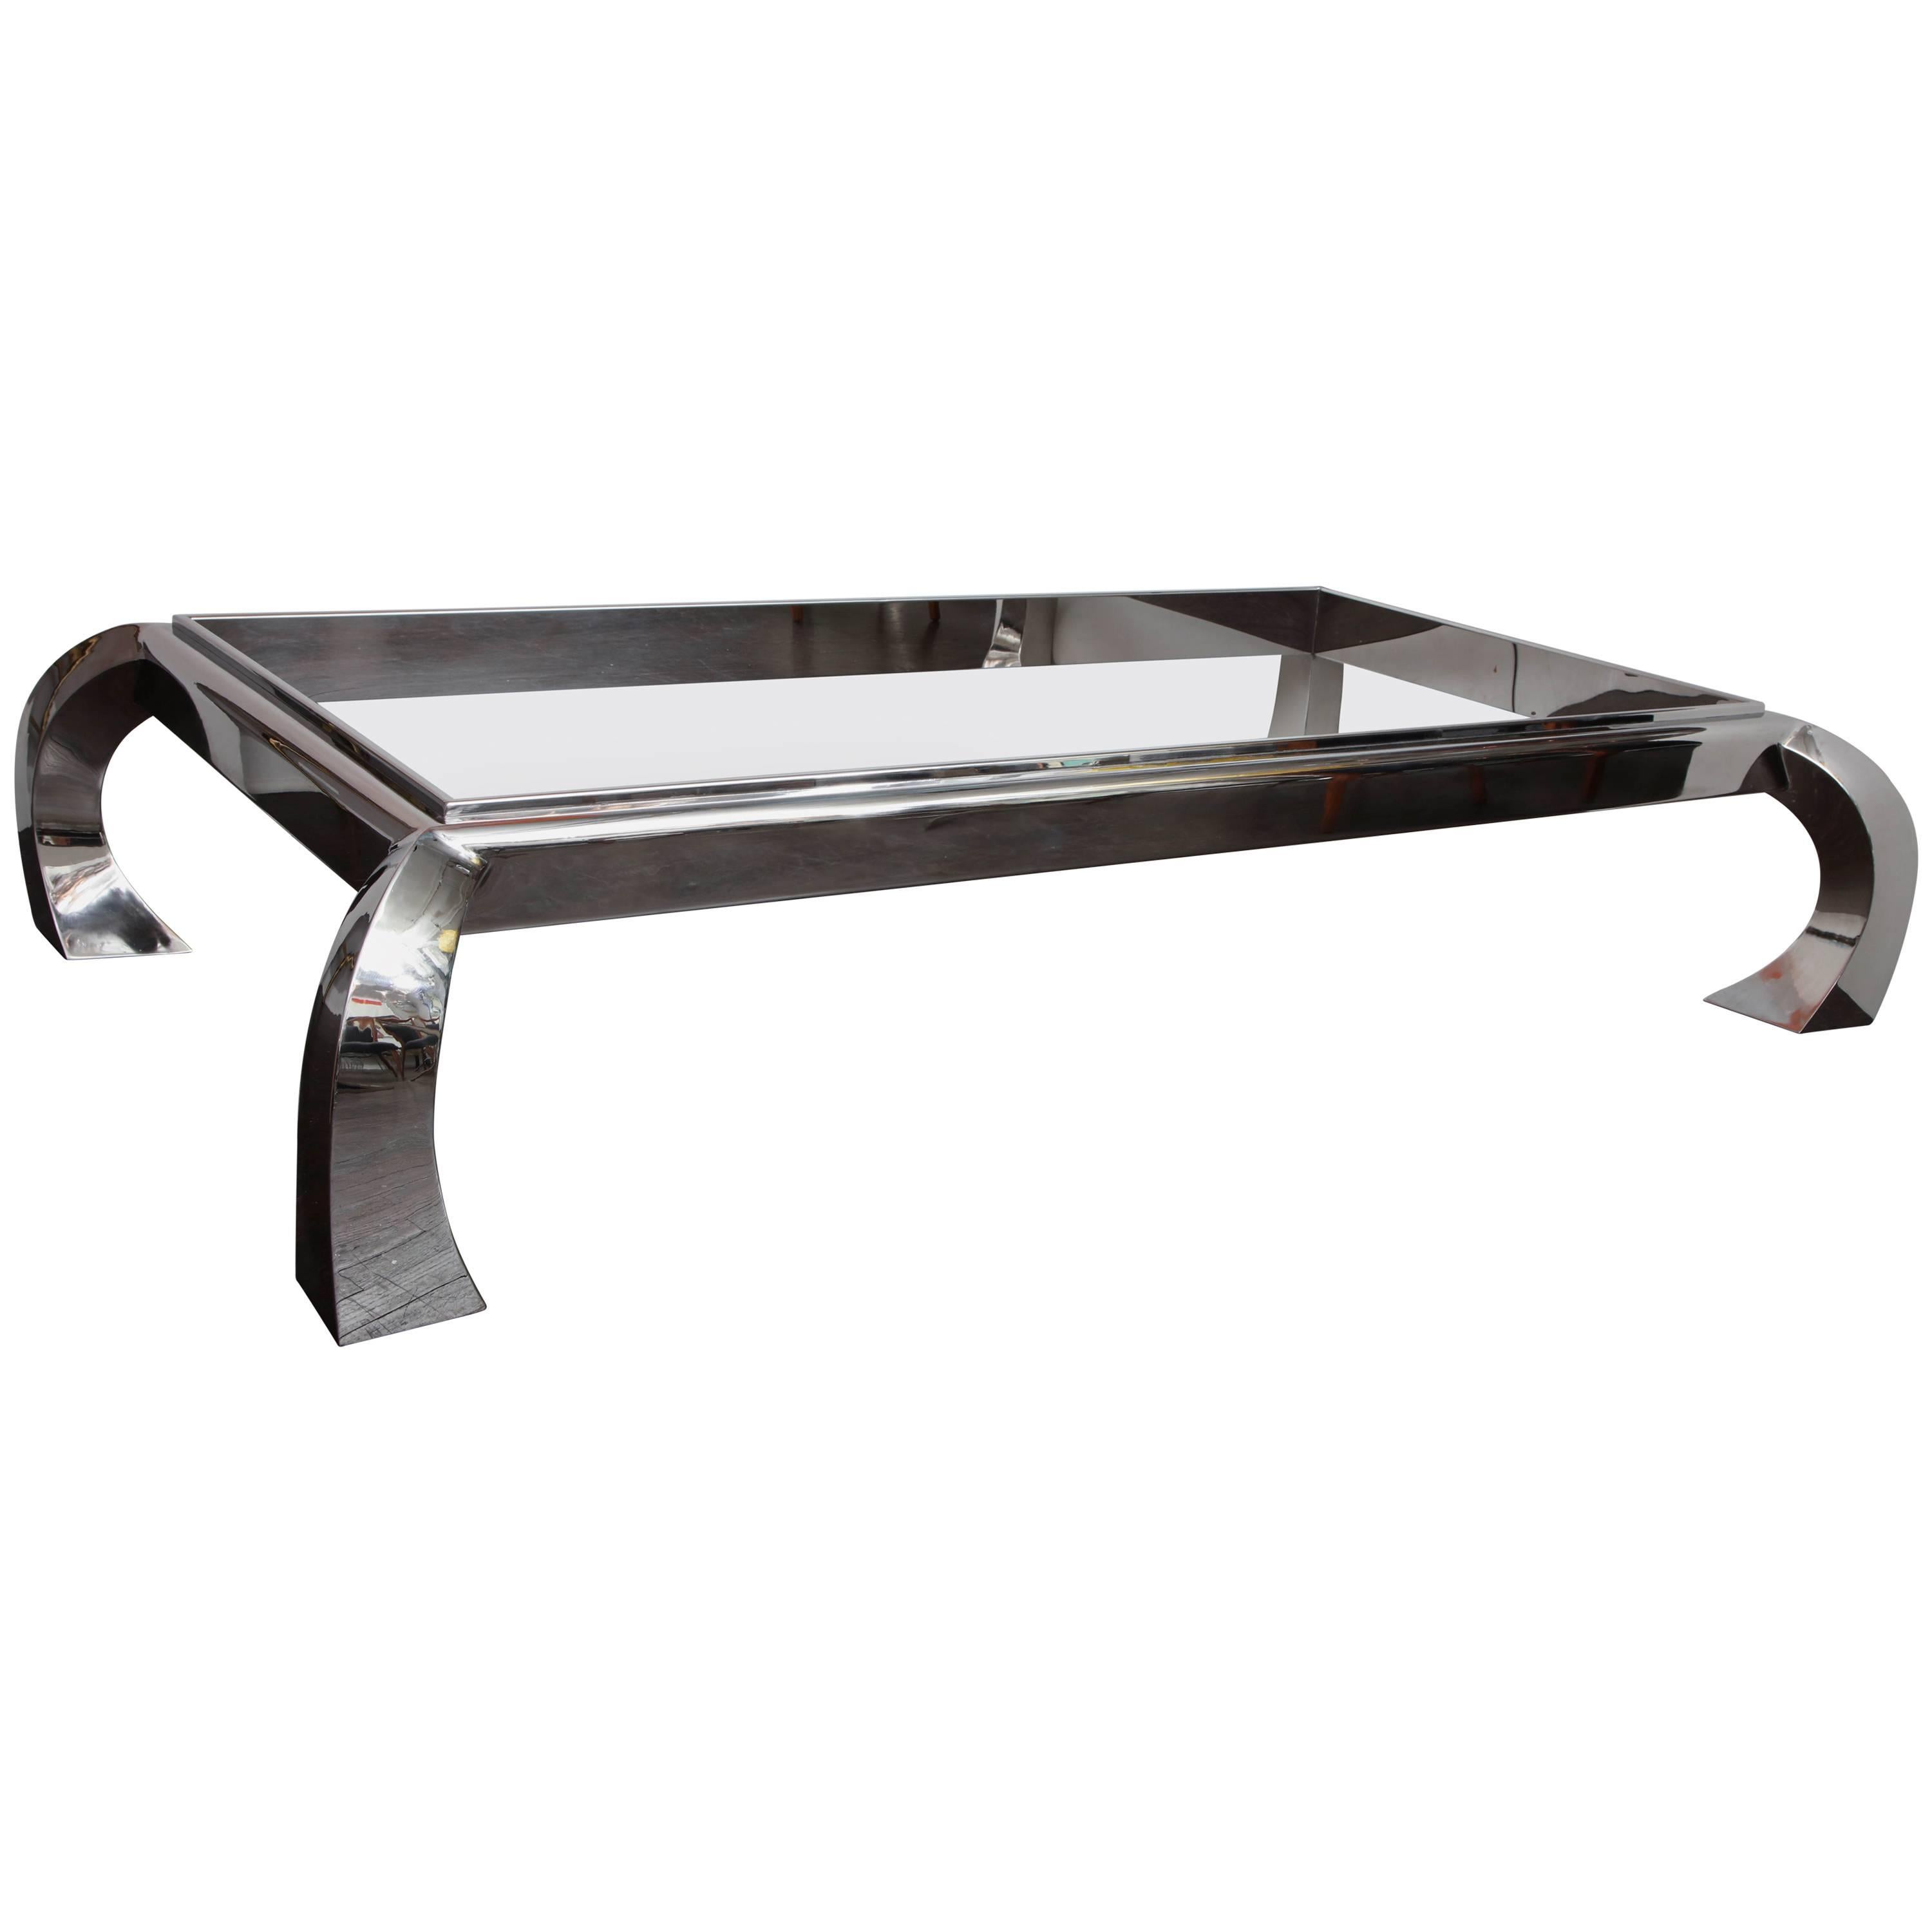 Ming Polished Nickel Cocktail Table with Glass Top For Sale